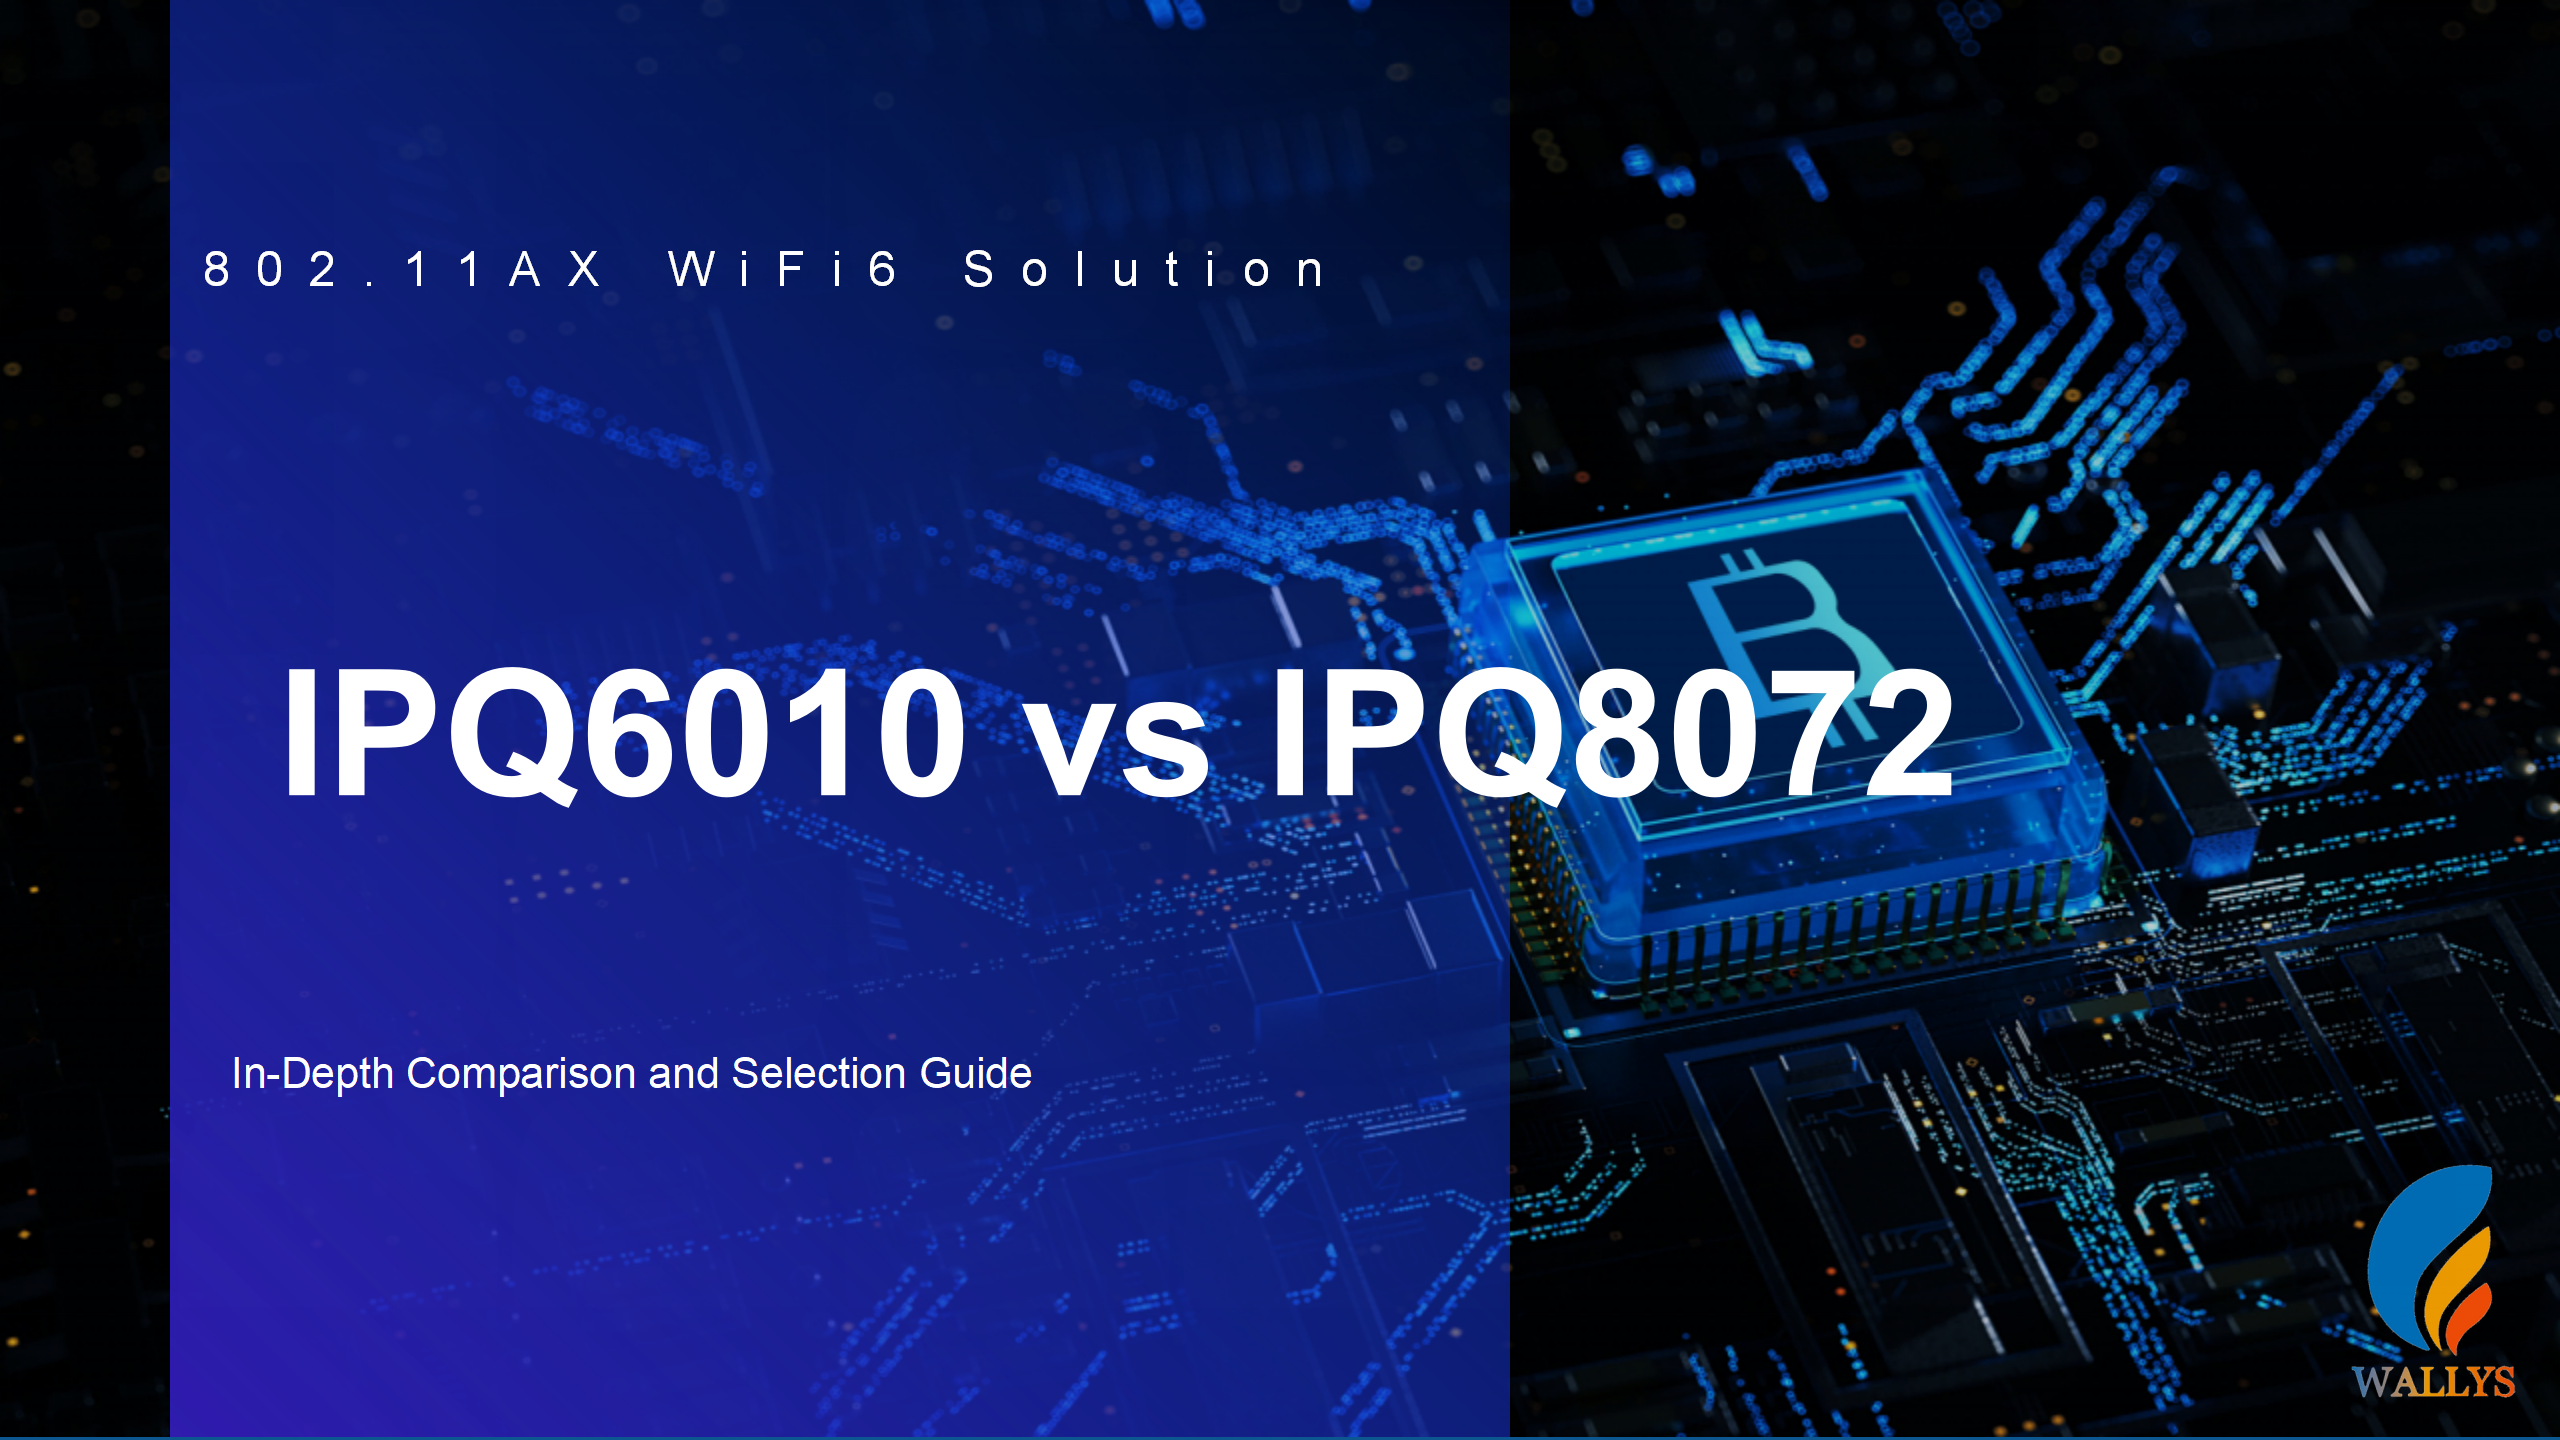 IPQ6010 vs IPQ8072 What's the difference?|802.11AX WiFi6 Solution DR6018 DR8072